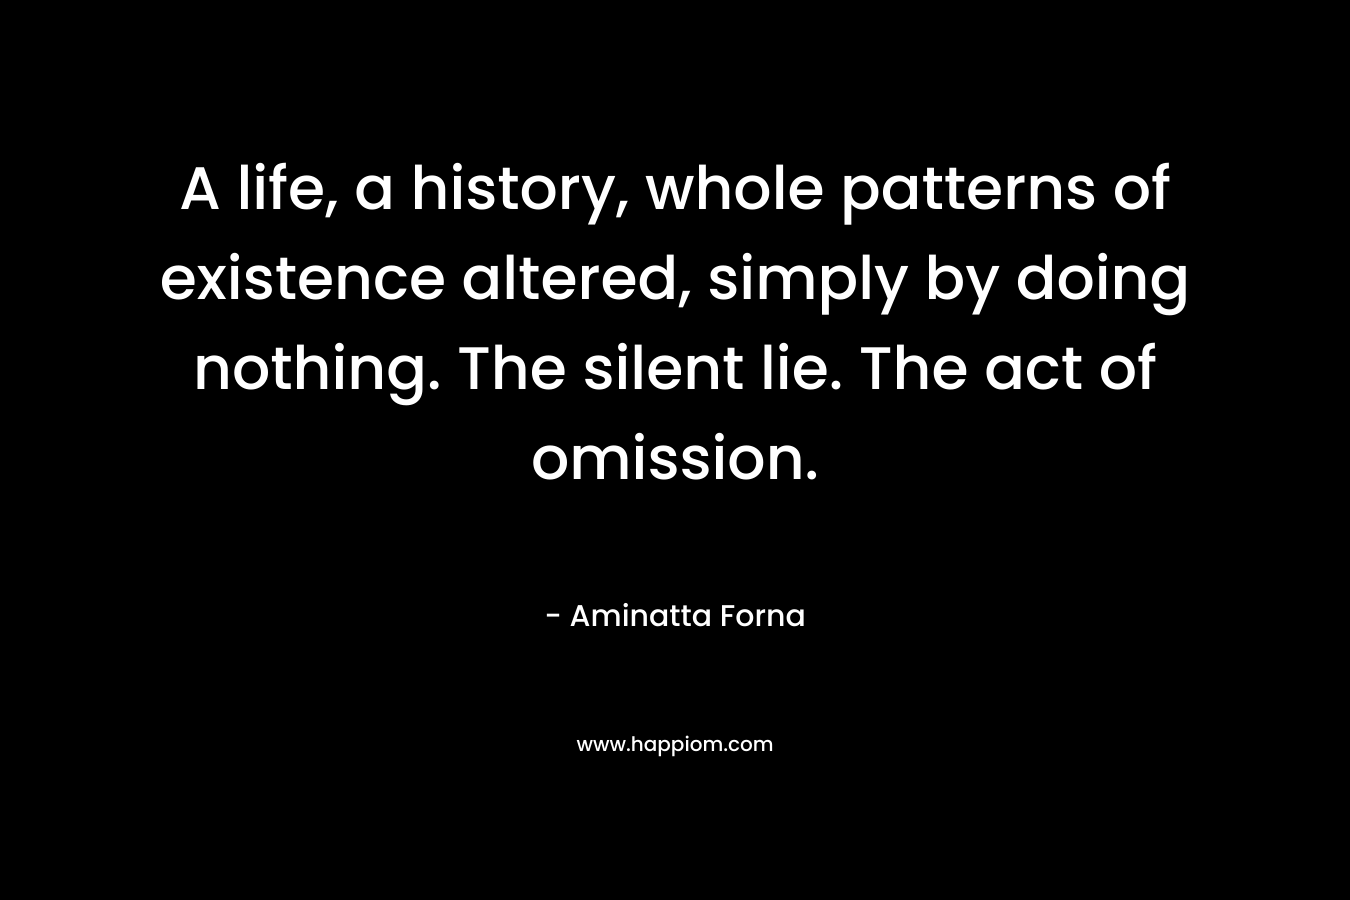 A life, a history, whole patterns of existence altered, simply by doing nothing. The silent lie. The act of omission. – Aminatta Forna